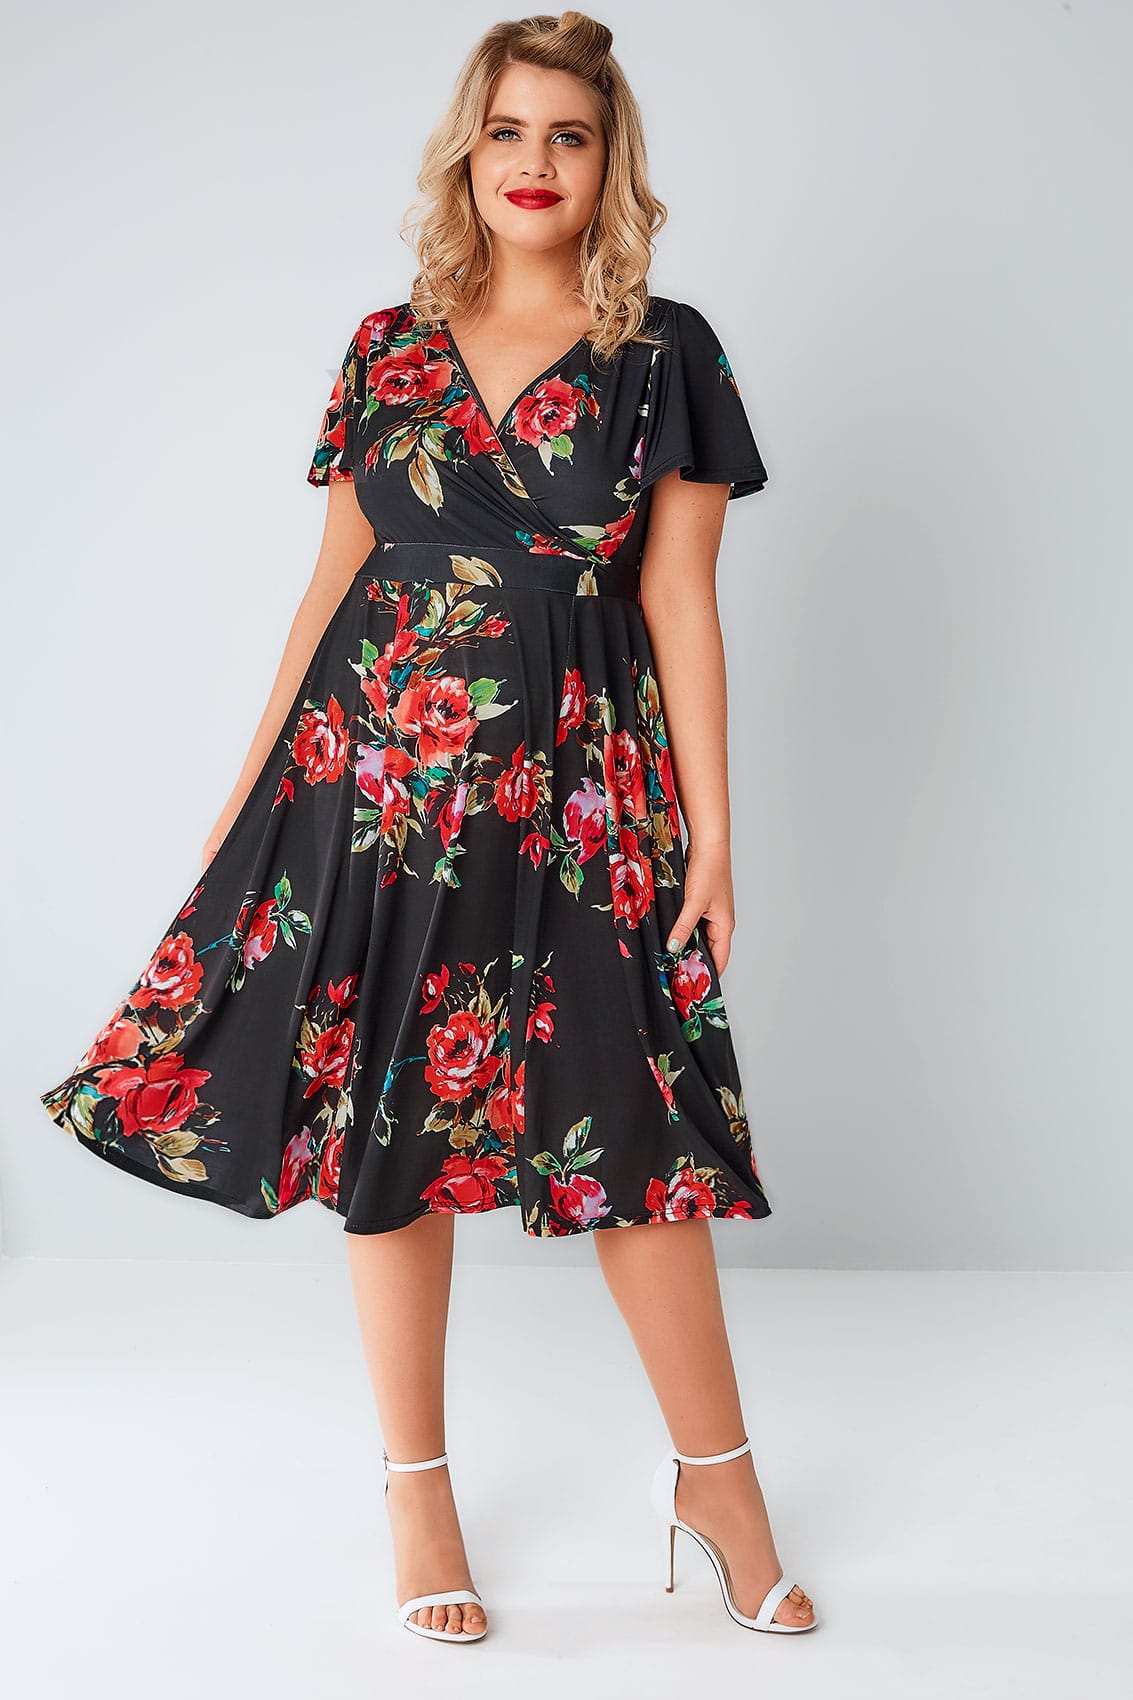 black dress with red roses plus size